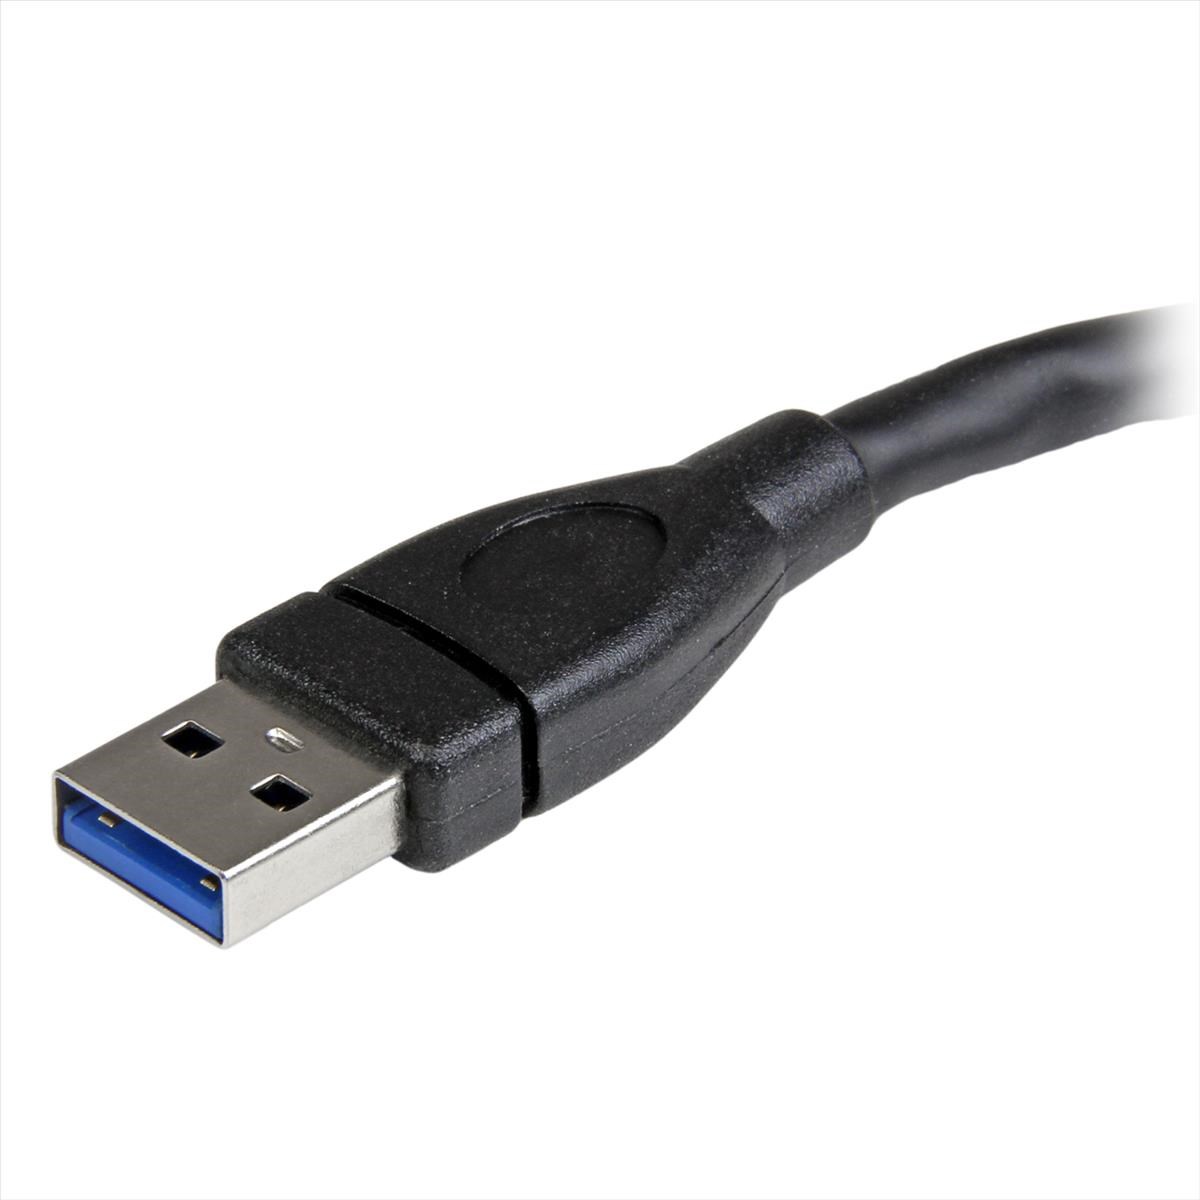 Photos - Cable (video, audio, USB) Startech.com  SuperSpeed USB 3.0 Cable A to A - M/F USB3EXT6INBK (6 inch)